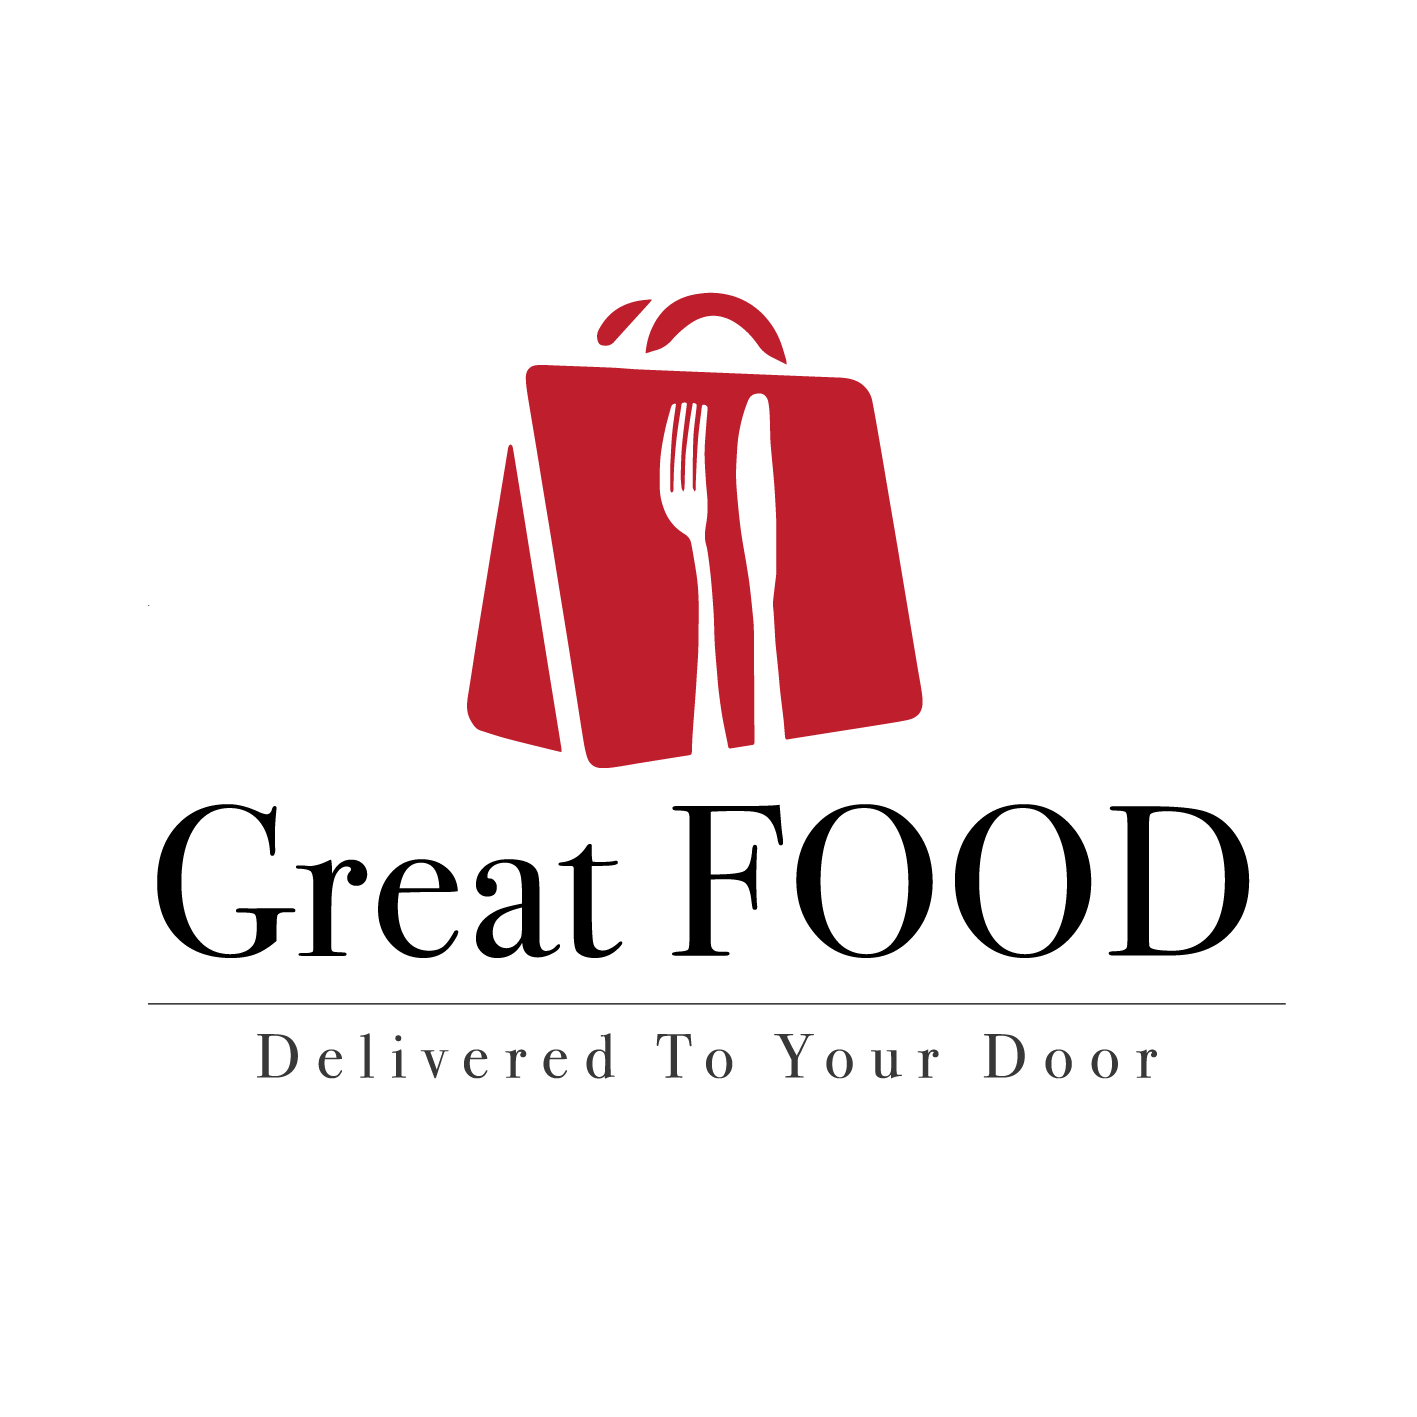 Great FOOD